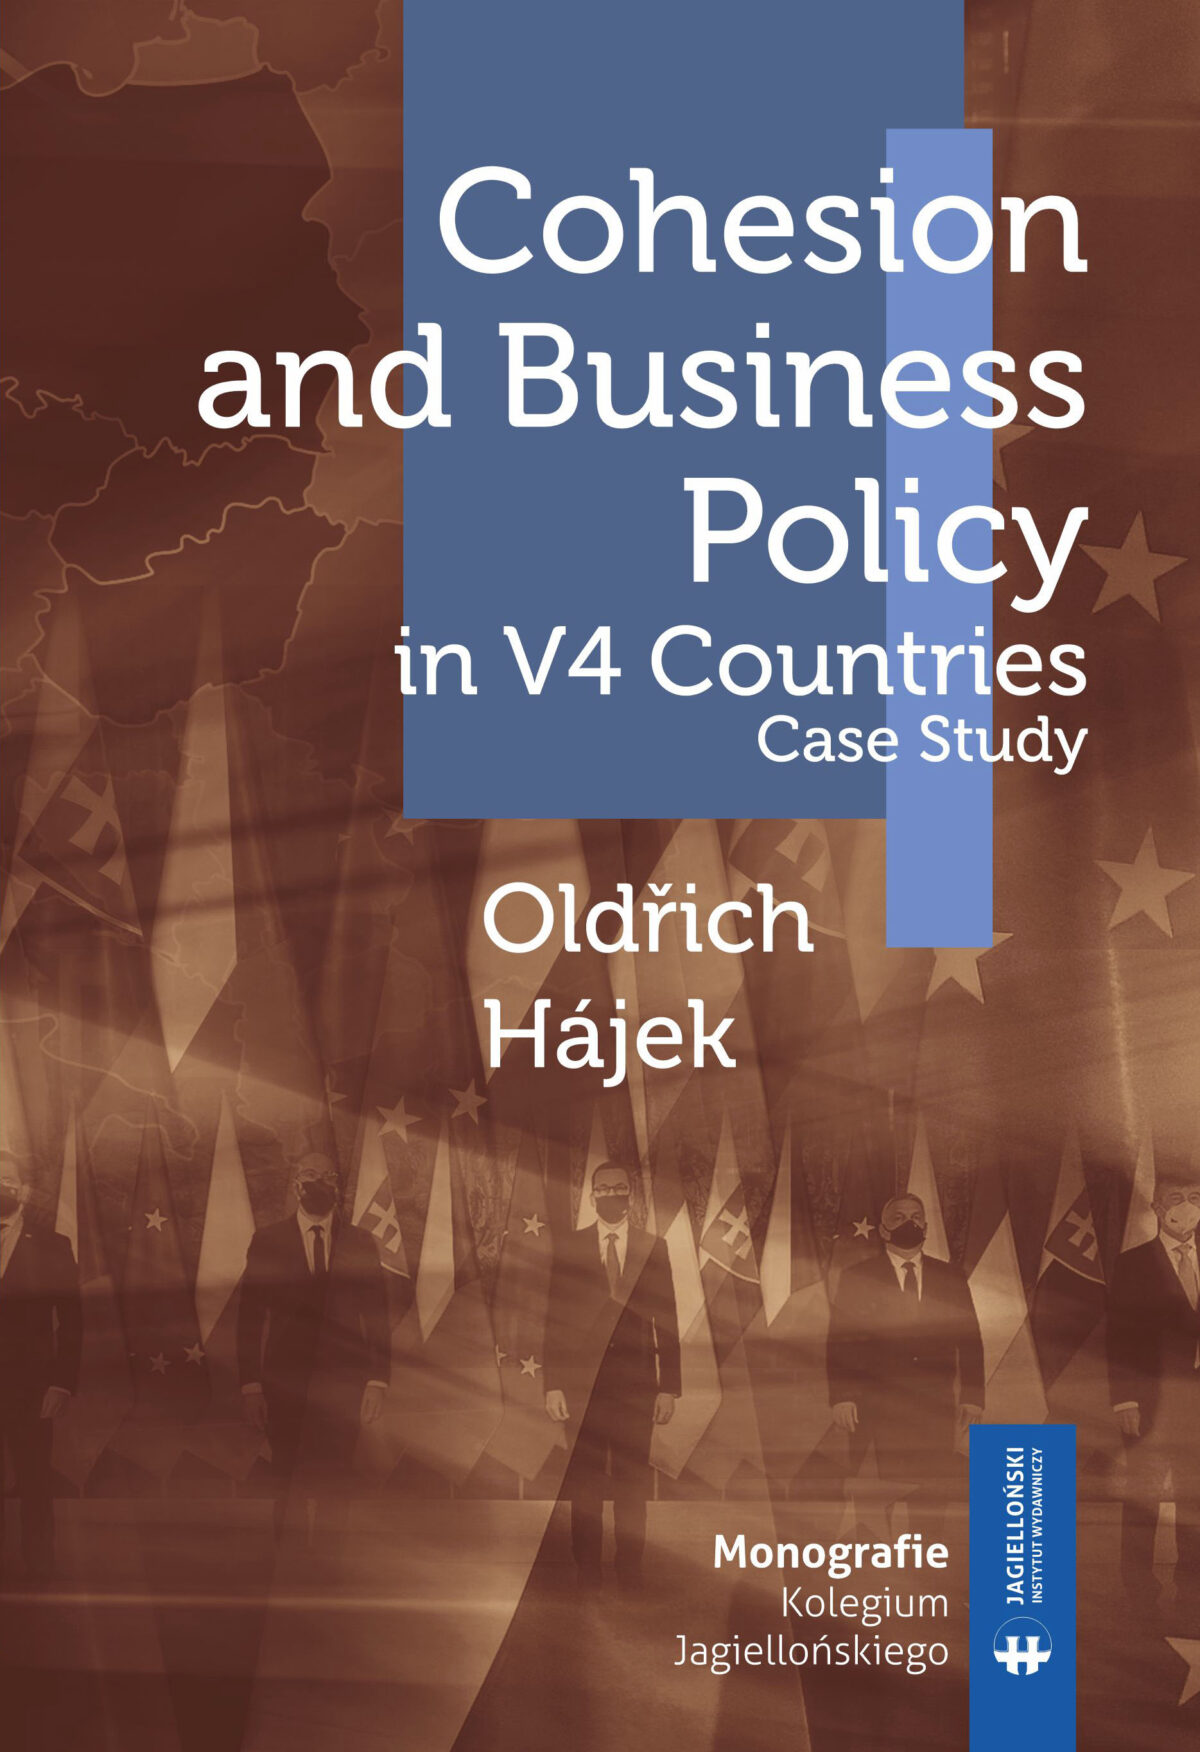 Cohesion and Business Policy in V4 Countries